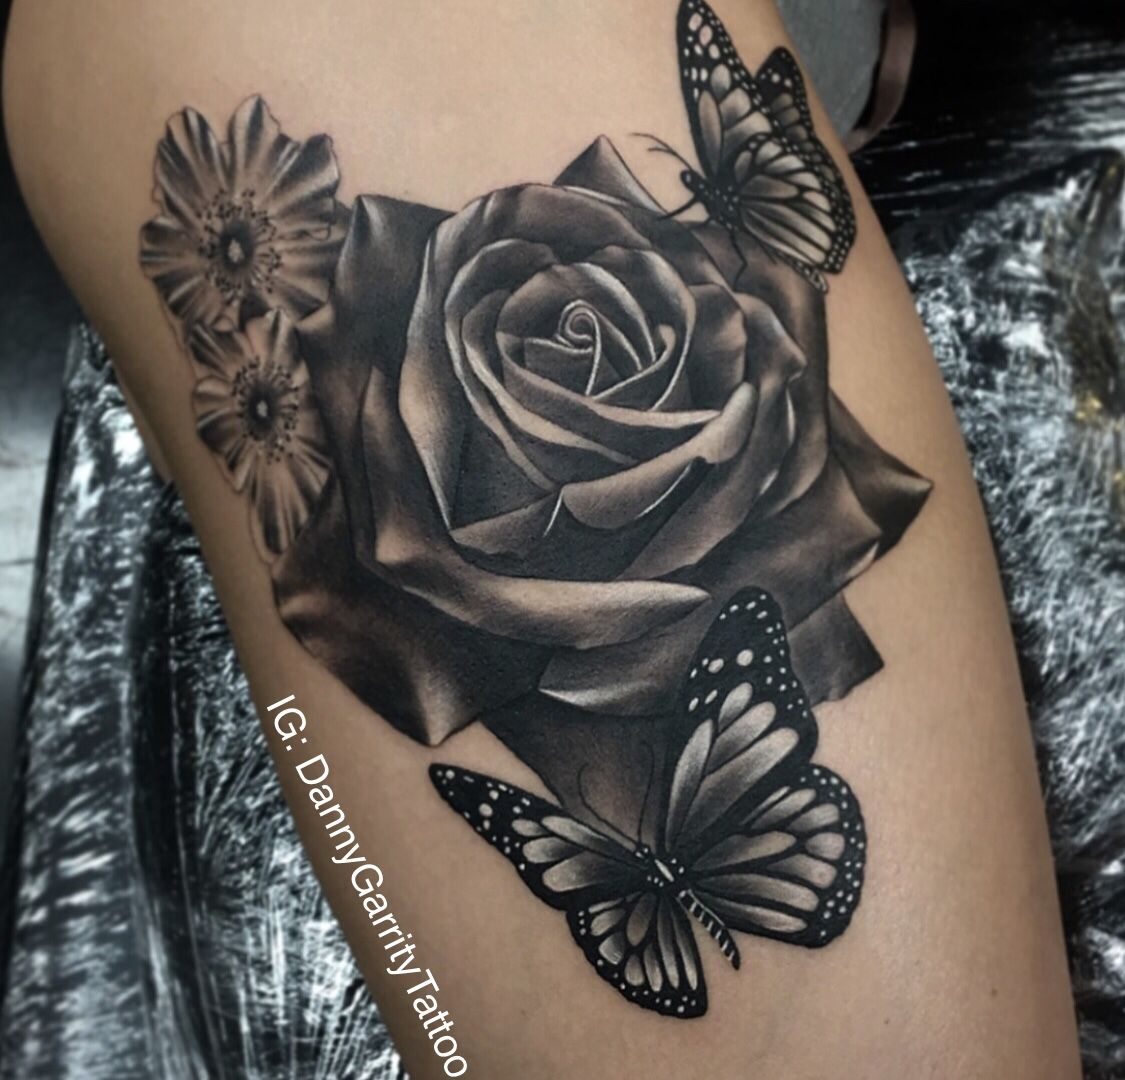 Realistic Black And Grey Rose Tattoo On A Thigh With Butterfly This intended for size 1125 X 1080